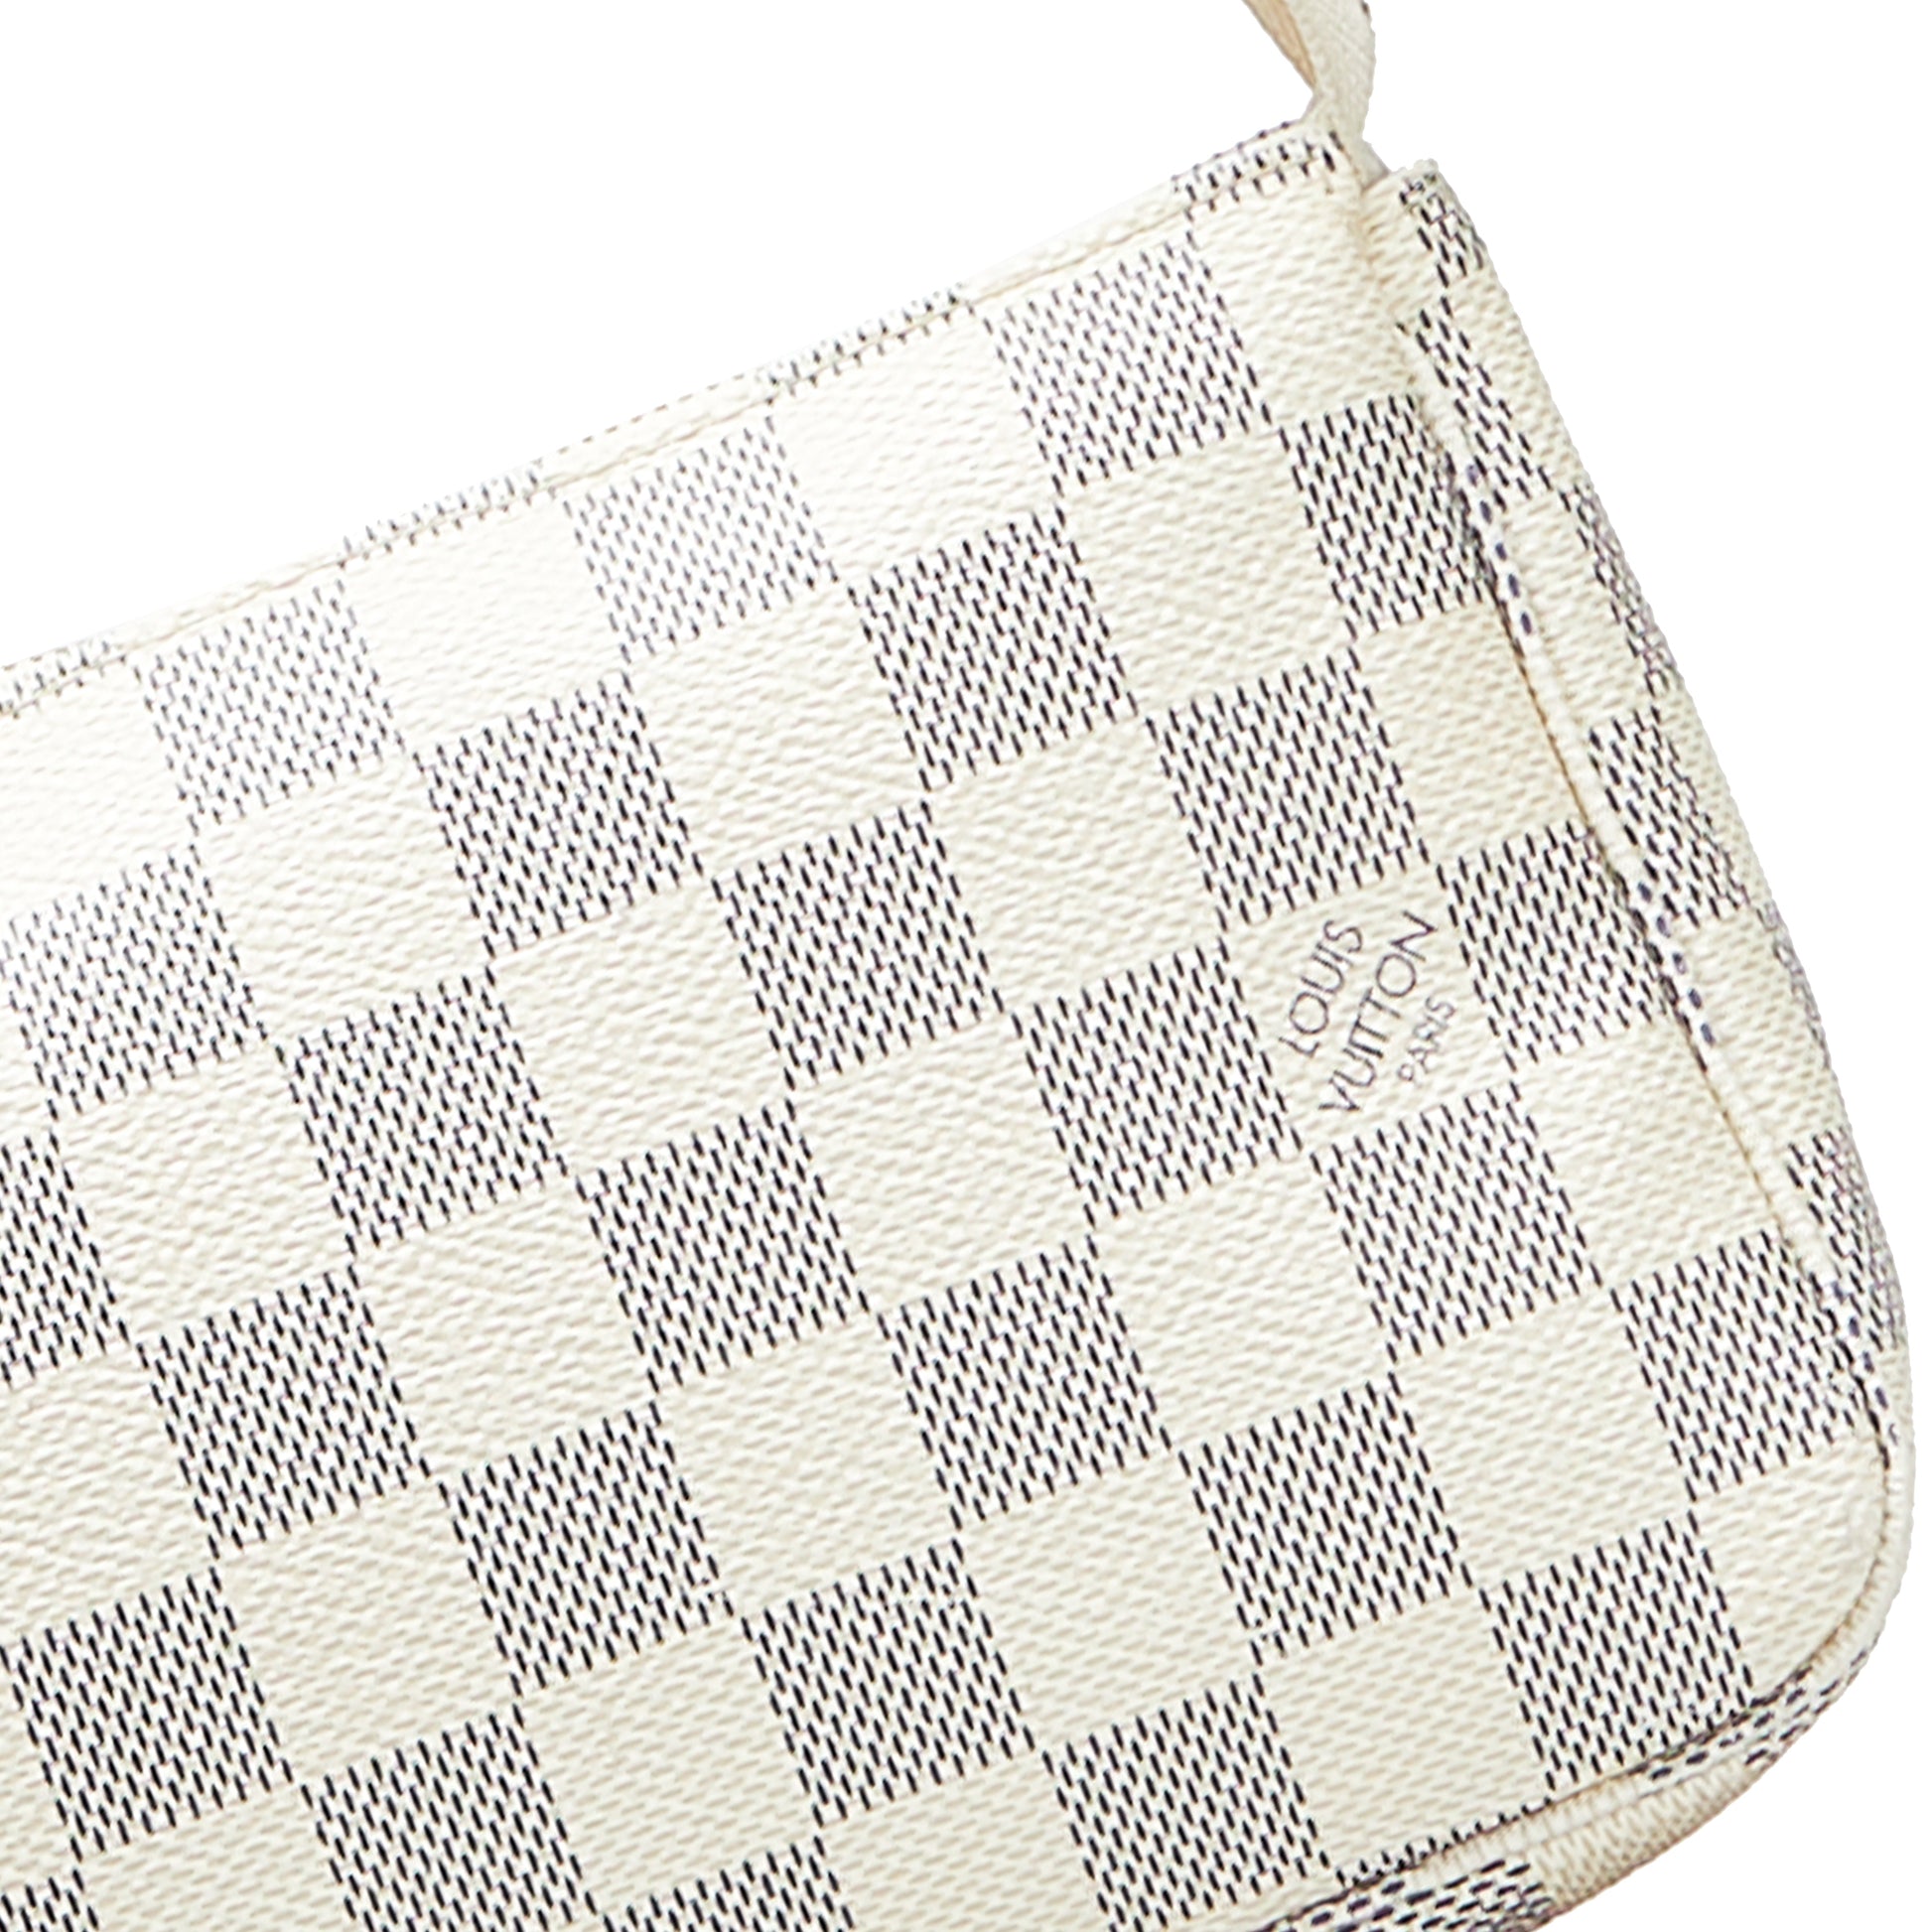 13.00 USD NEW LV Louis Vuitton Damier Wallet with gift bag